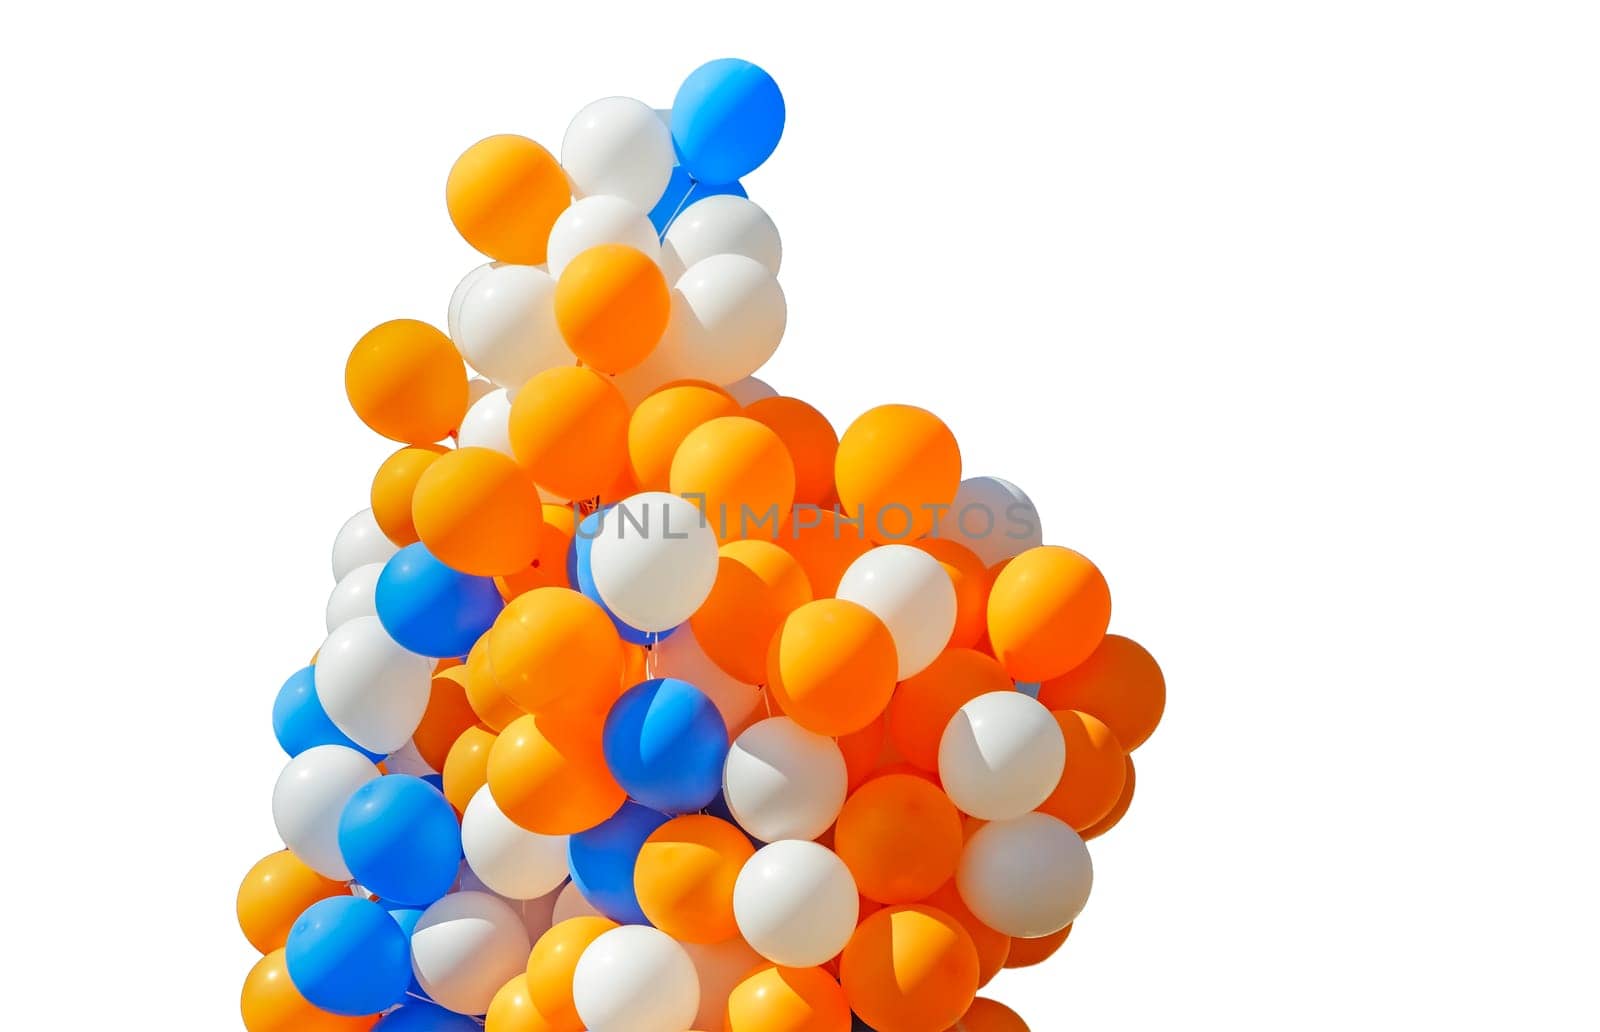 A large number of beautiful red, blue and white balloons, decoration for the holiday.